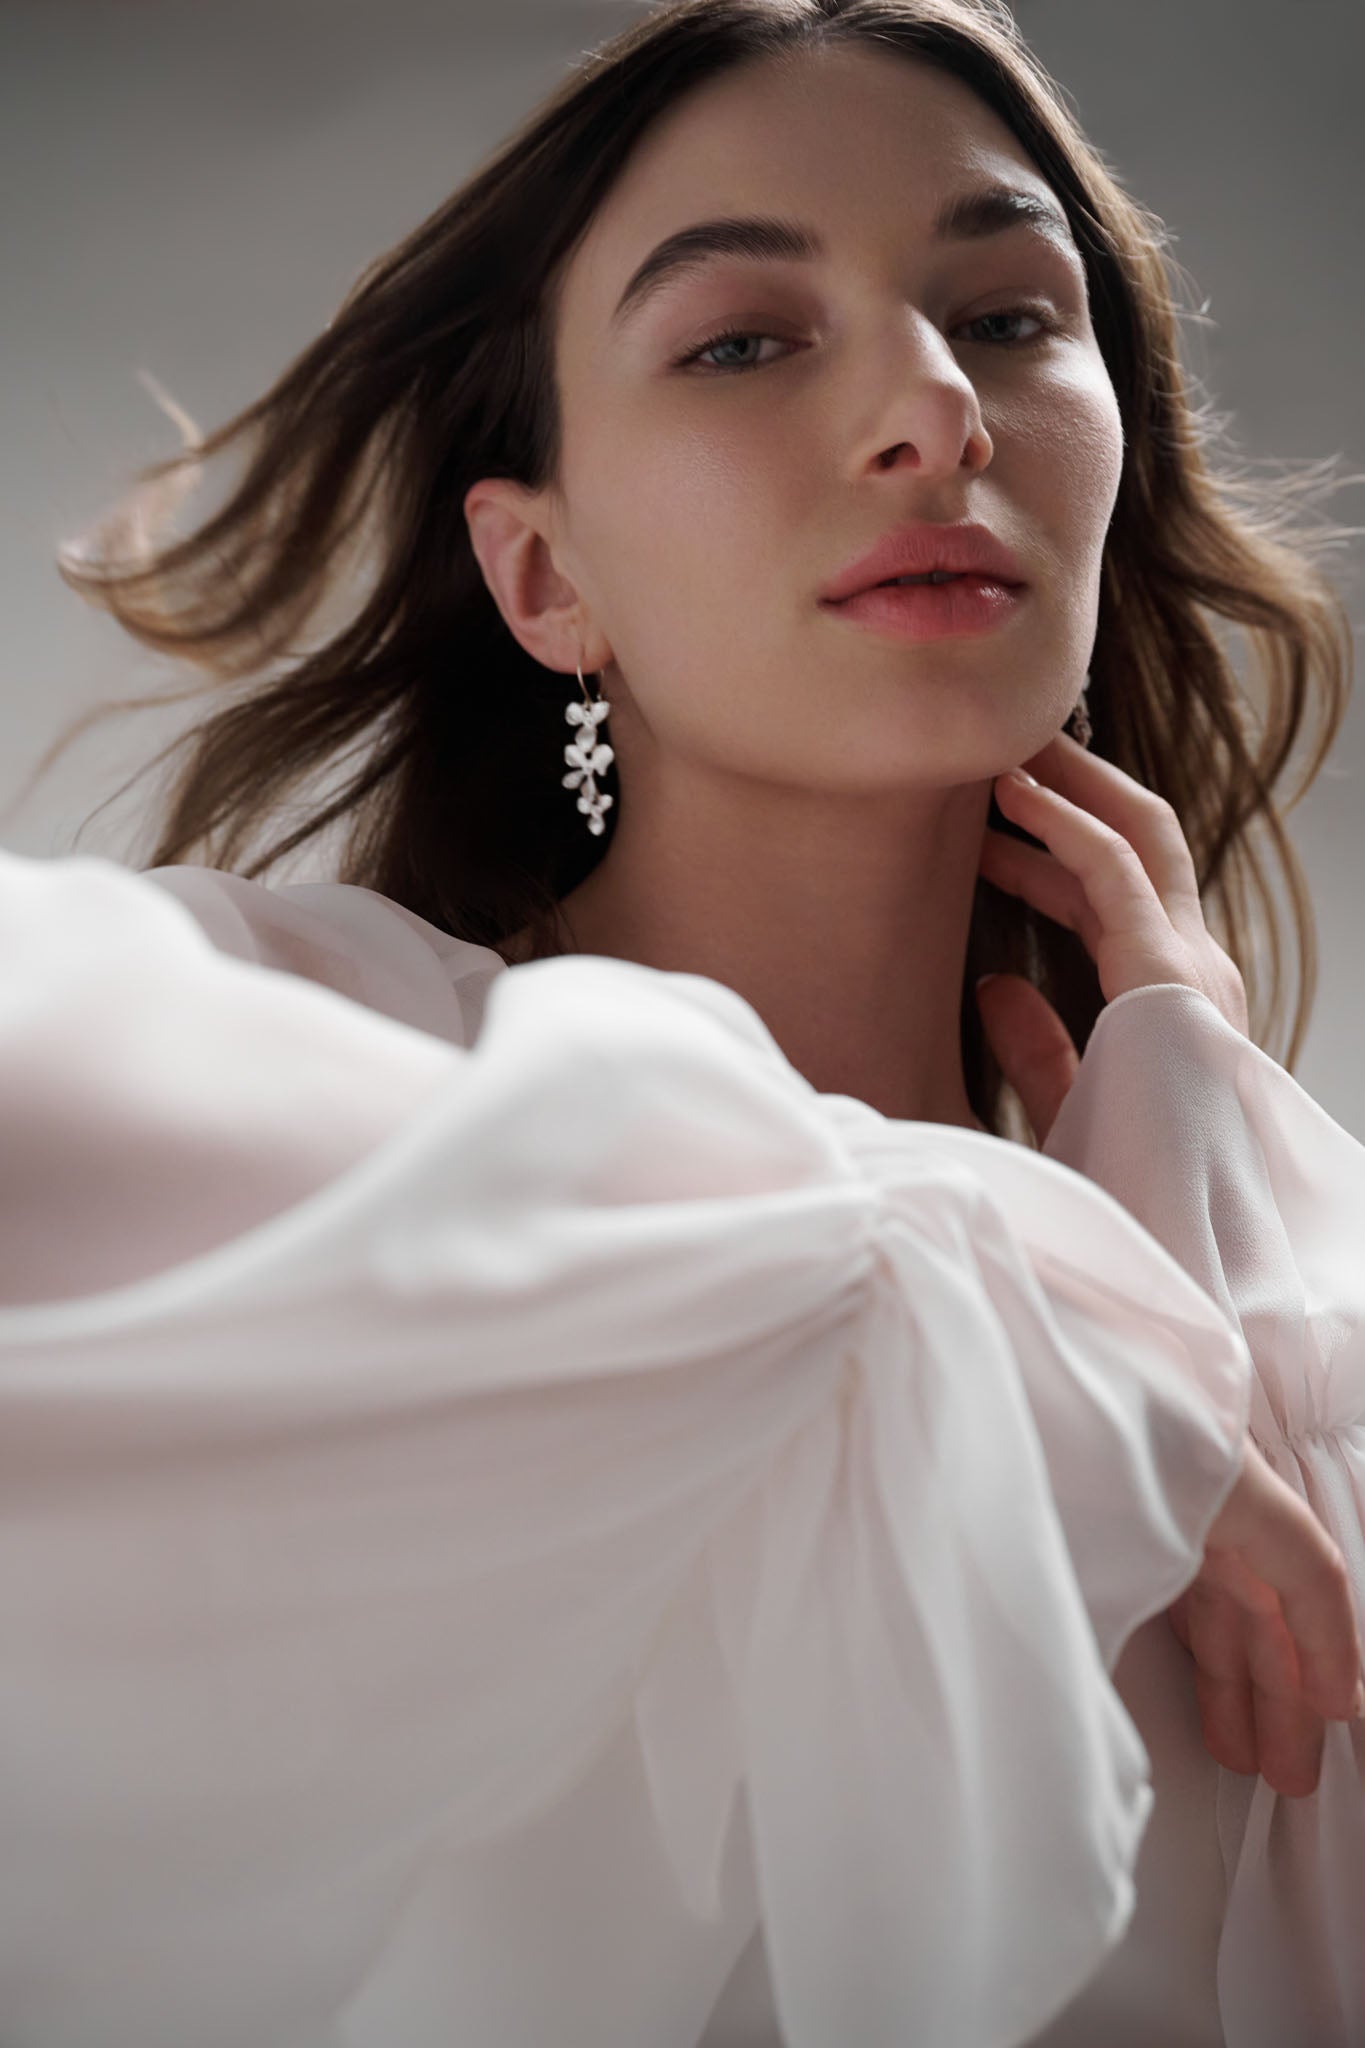 These playful Orchid earrings make the perfect accessory to add a touch of femininity to any look. Expertly crafted in silver, they will be sure to make a statement with every wear.